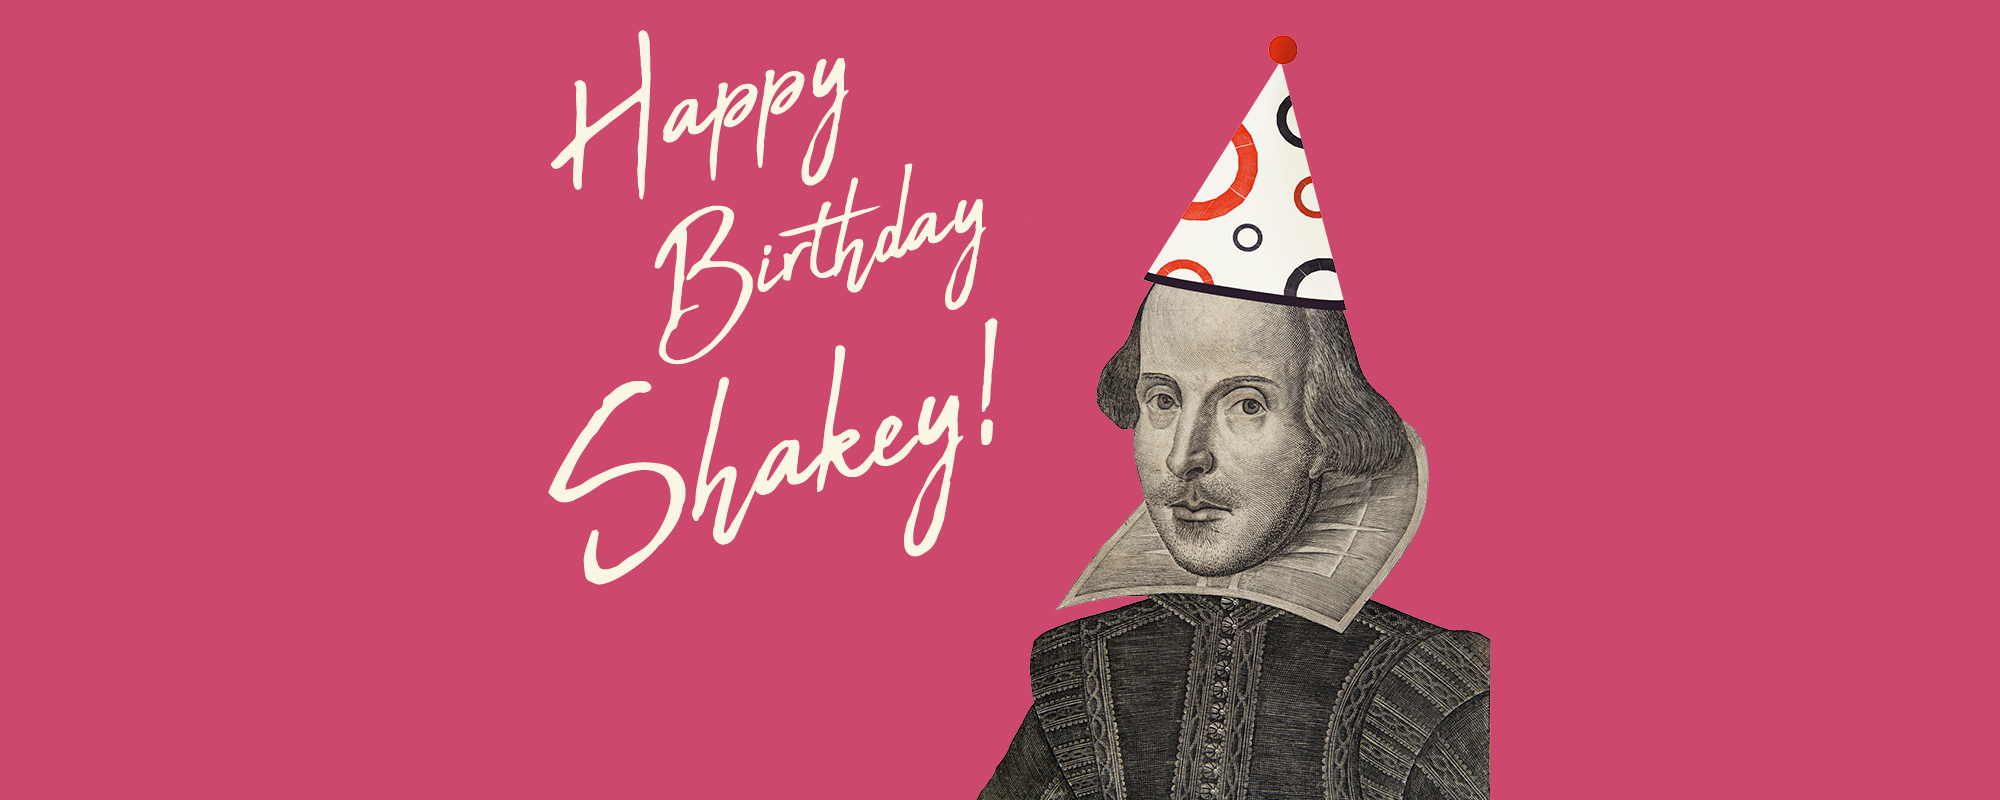 Happy Birthday Shakey! hand written text alongside an image of Shakespeare wearing a party hat